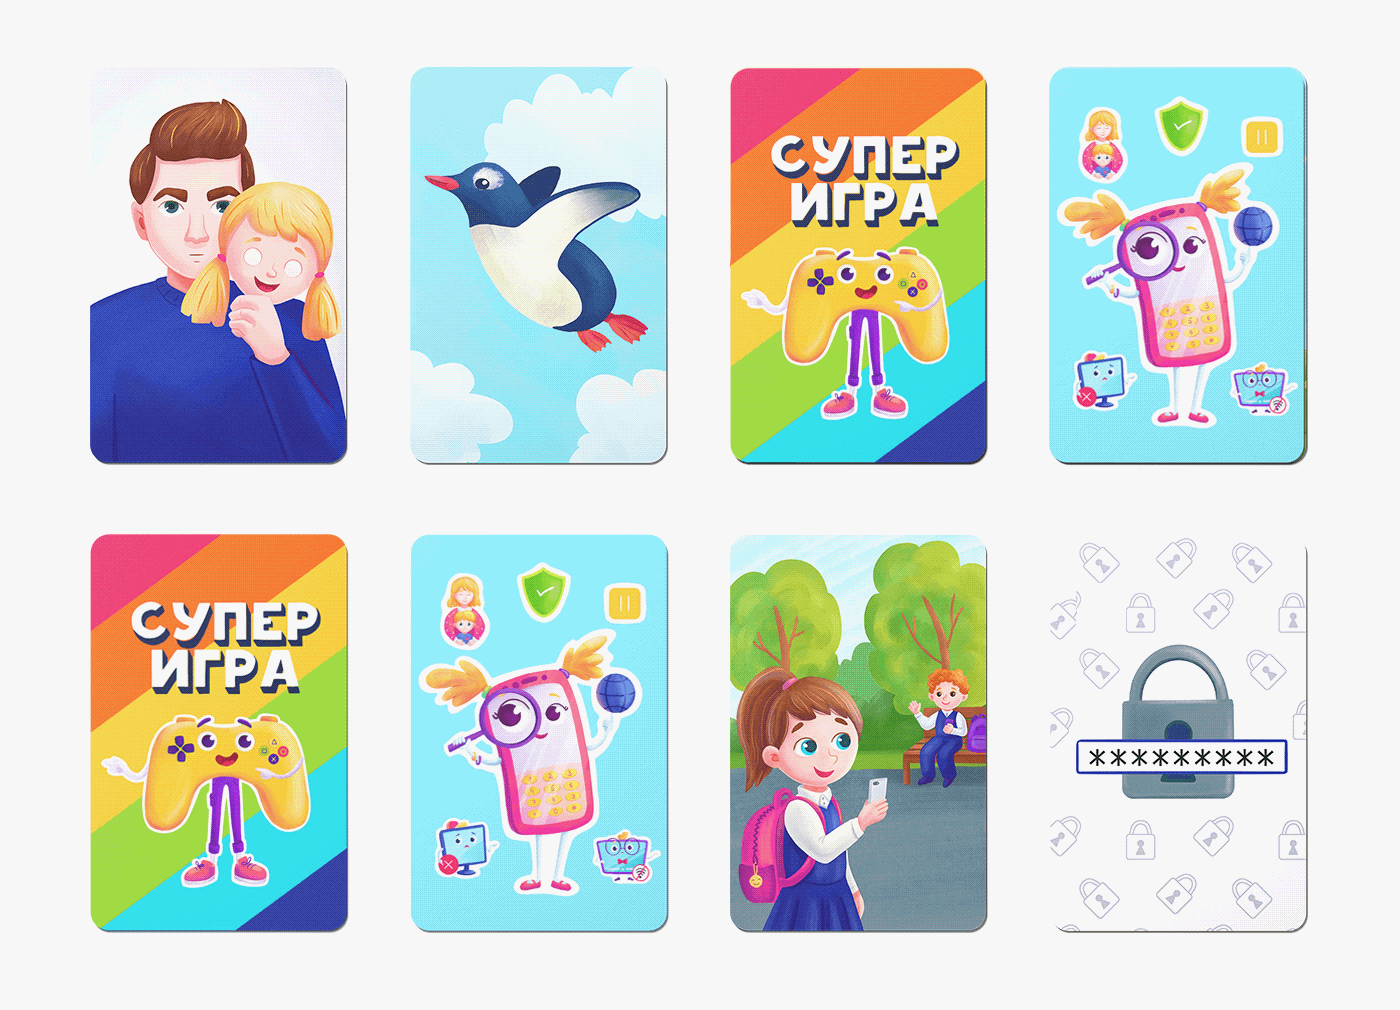 cards for a children's board game on the topic of safe behavior of children on the Internet